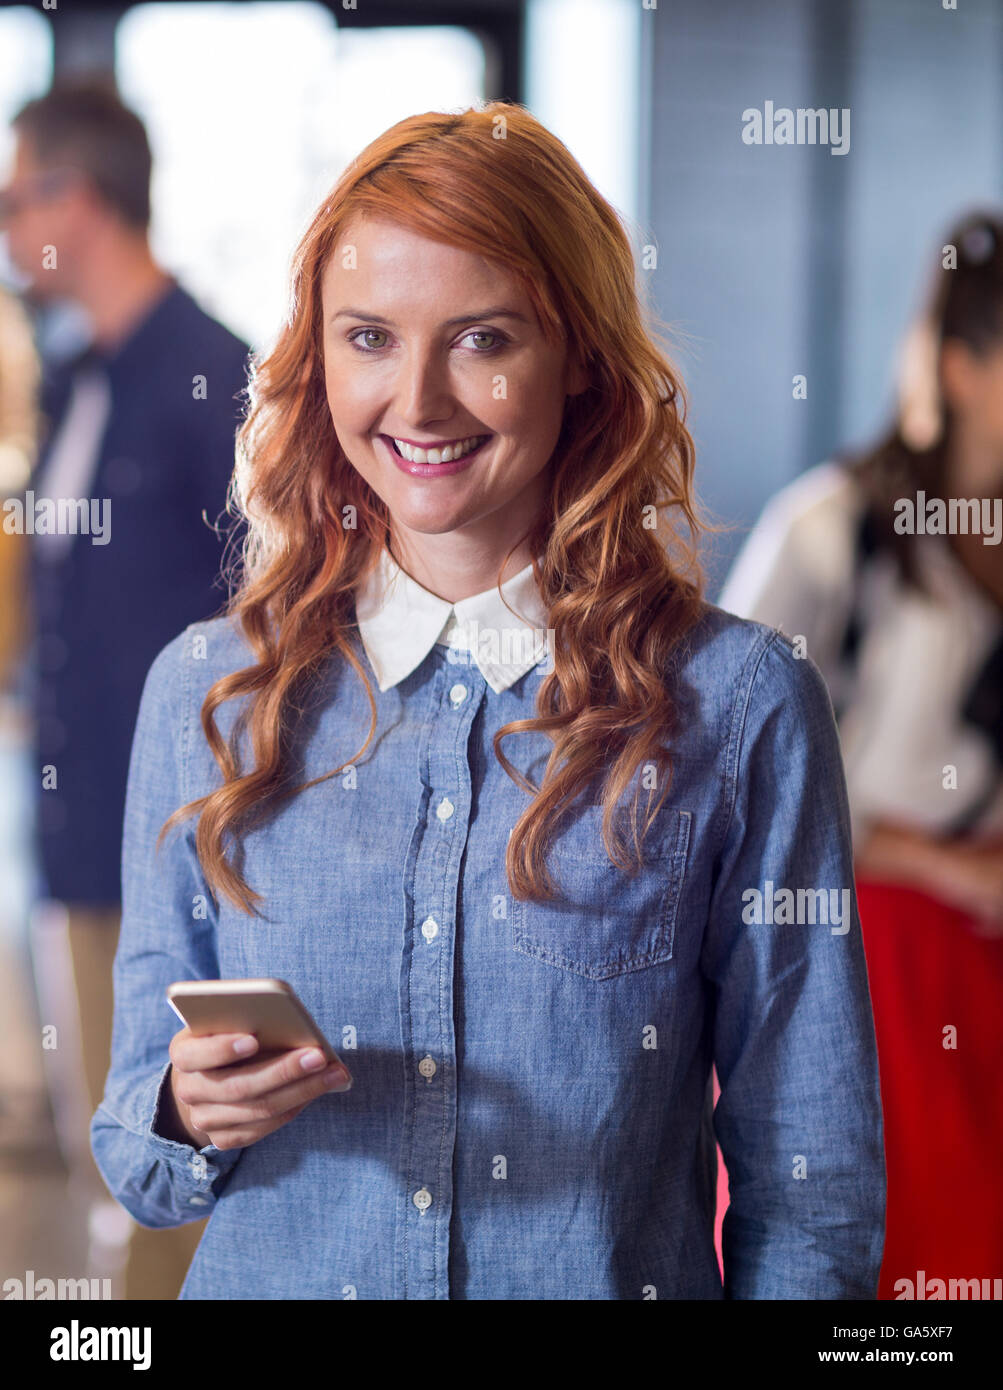 Portrait of smiling woman holding mobile phone in office Stock Photo